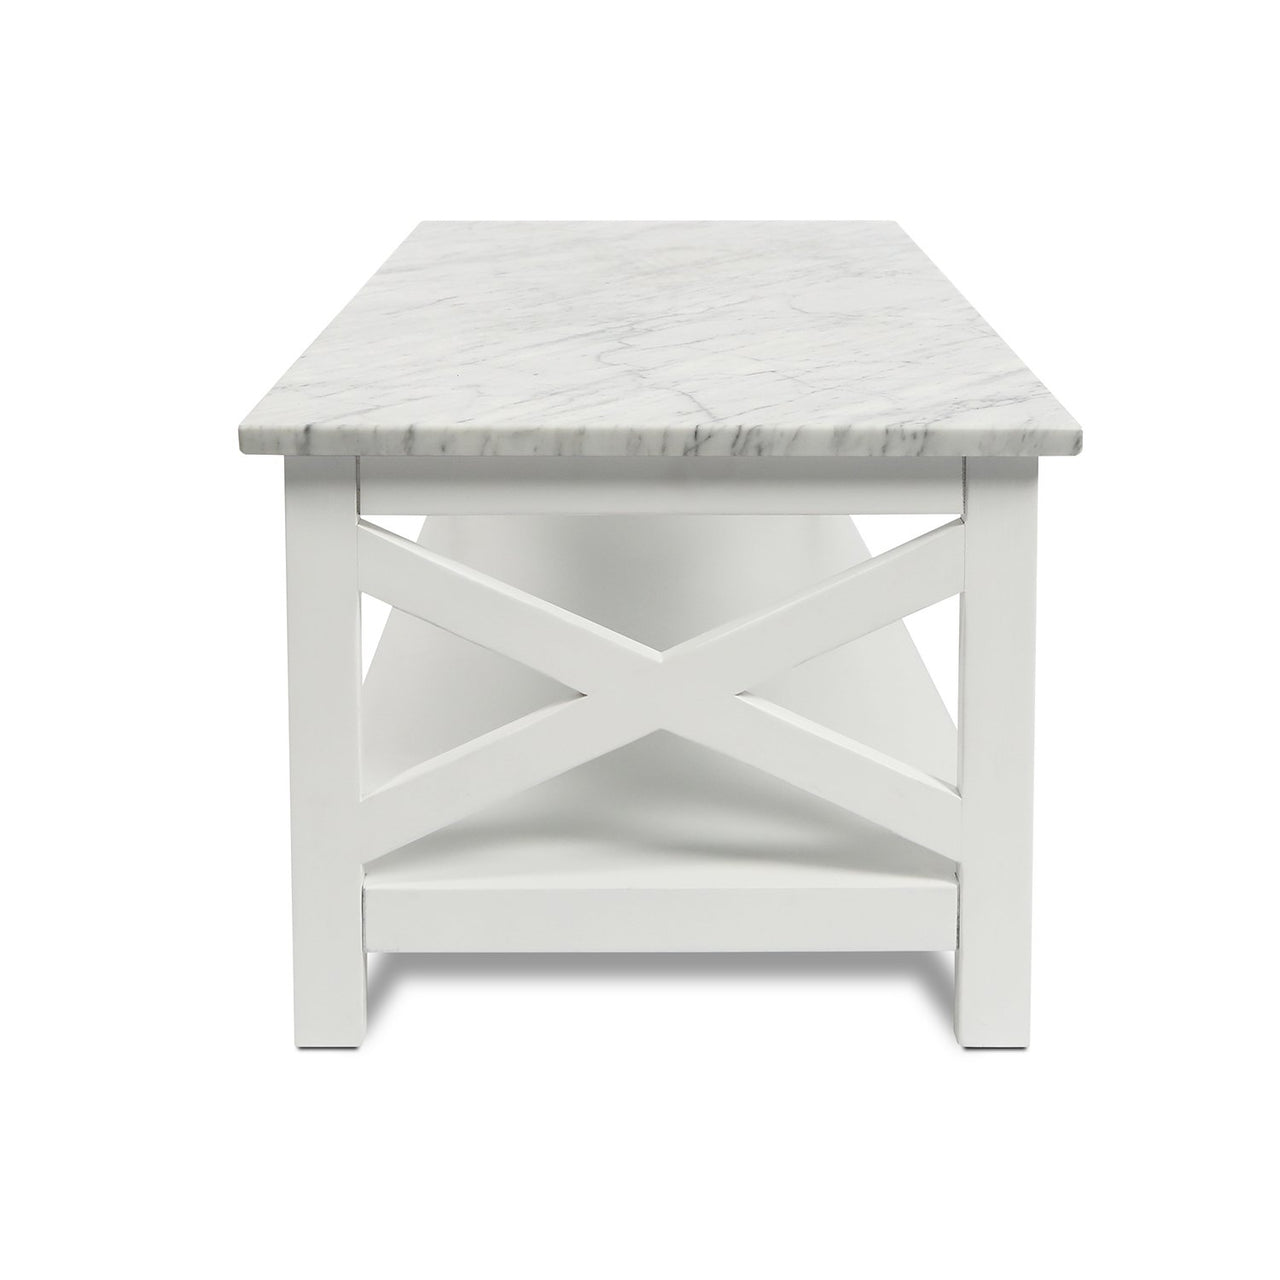 Agatha 44" Rectangular Italian Carrara White Marble Coffee Table with Color Solid Wood Legs Writing Desk The Bianco Collection 